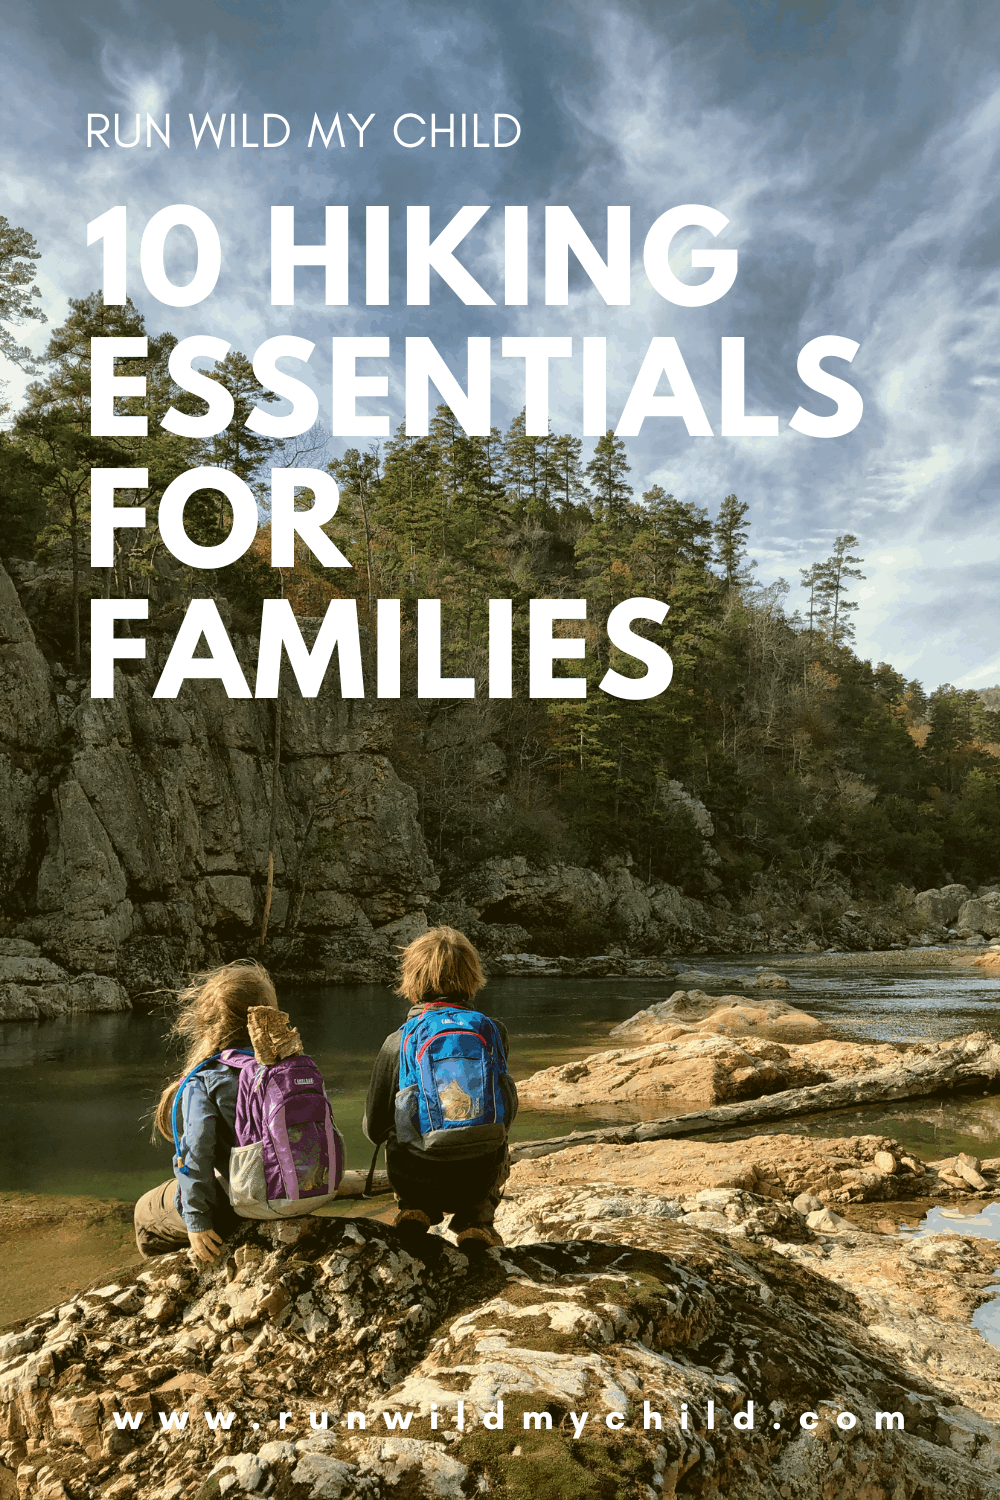 Hiking Essentials for Families - What to Pack When Hiking with Kids